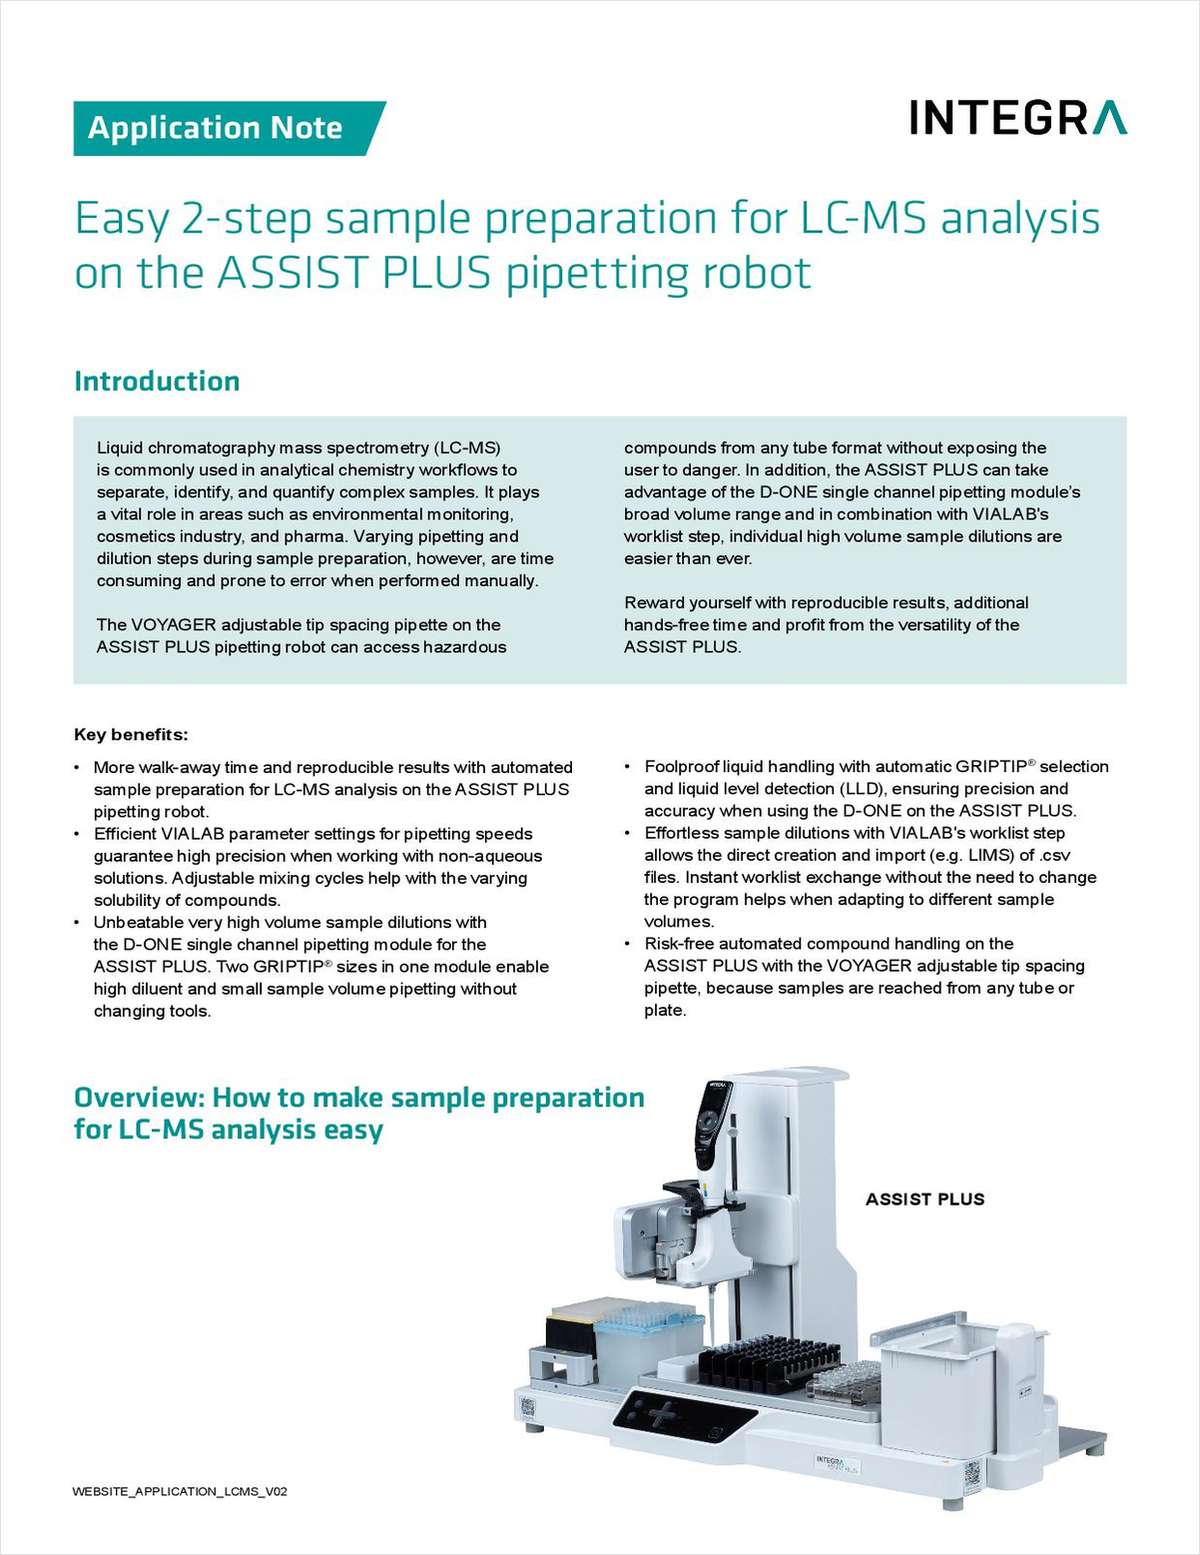 Easy Two-Step Sample Preparation for LC-MS Analysis on the Assist Plus Pipetting Robot